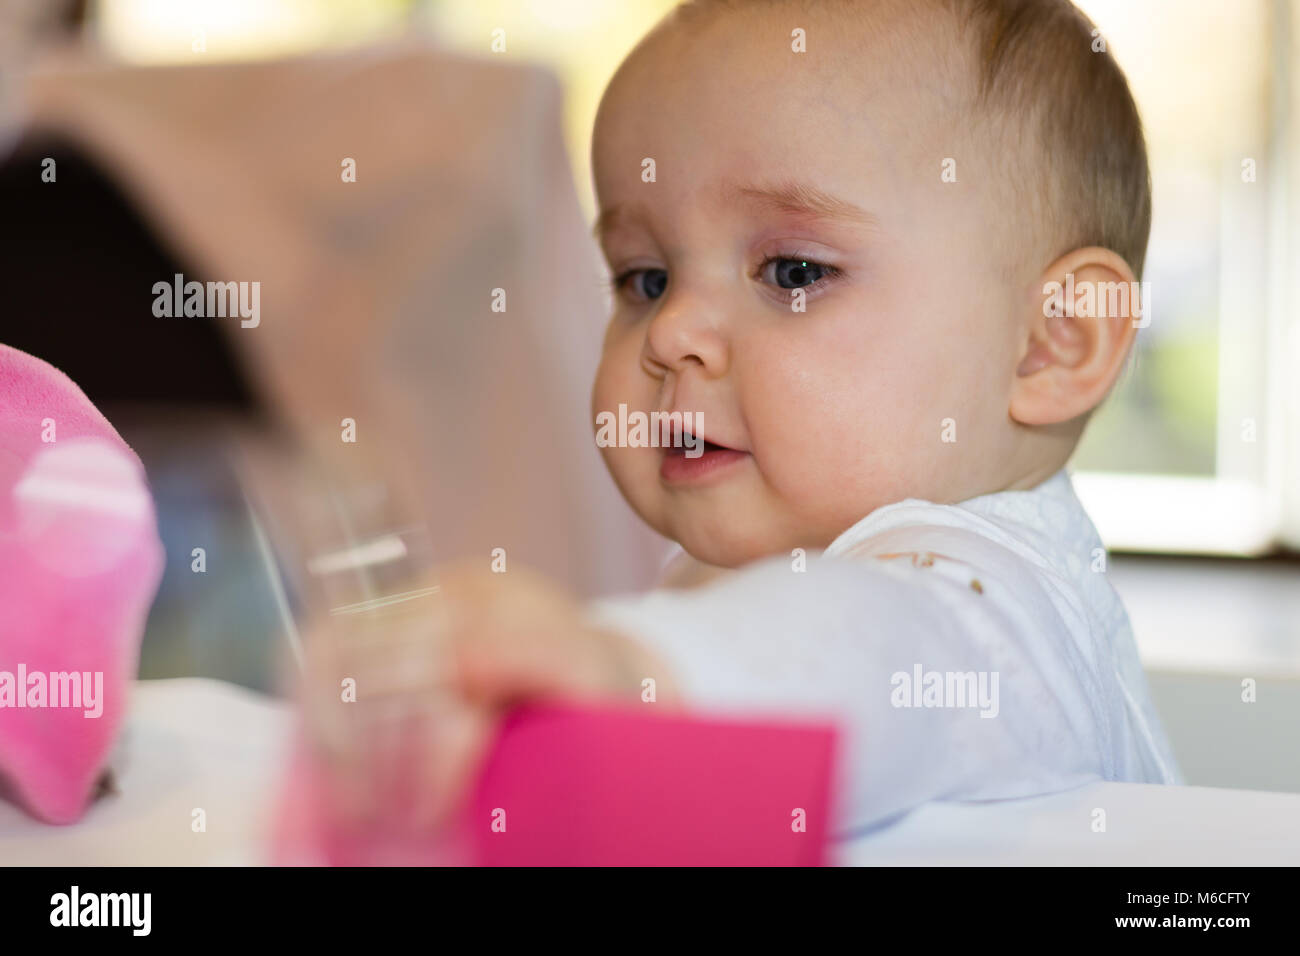 Cute baby girl, 10 months old, slapping with her arm Stock Photo